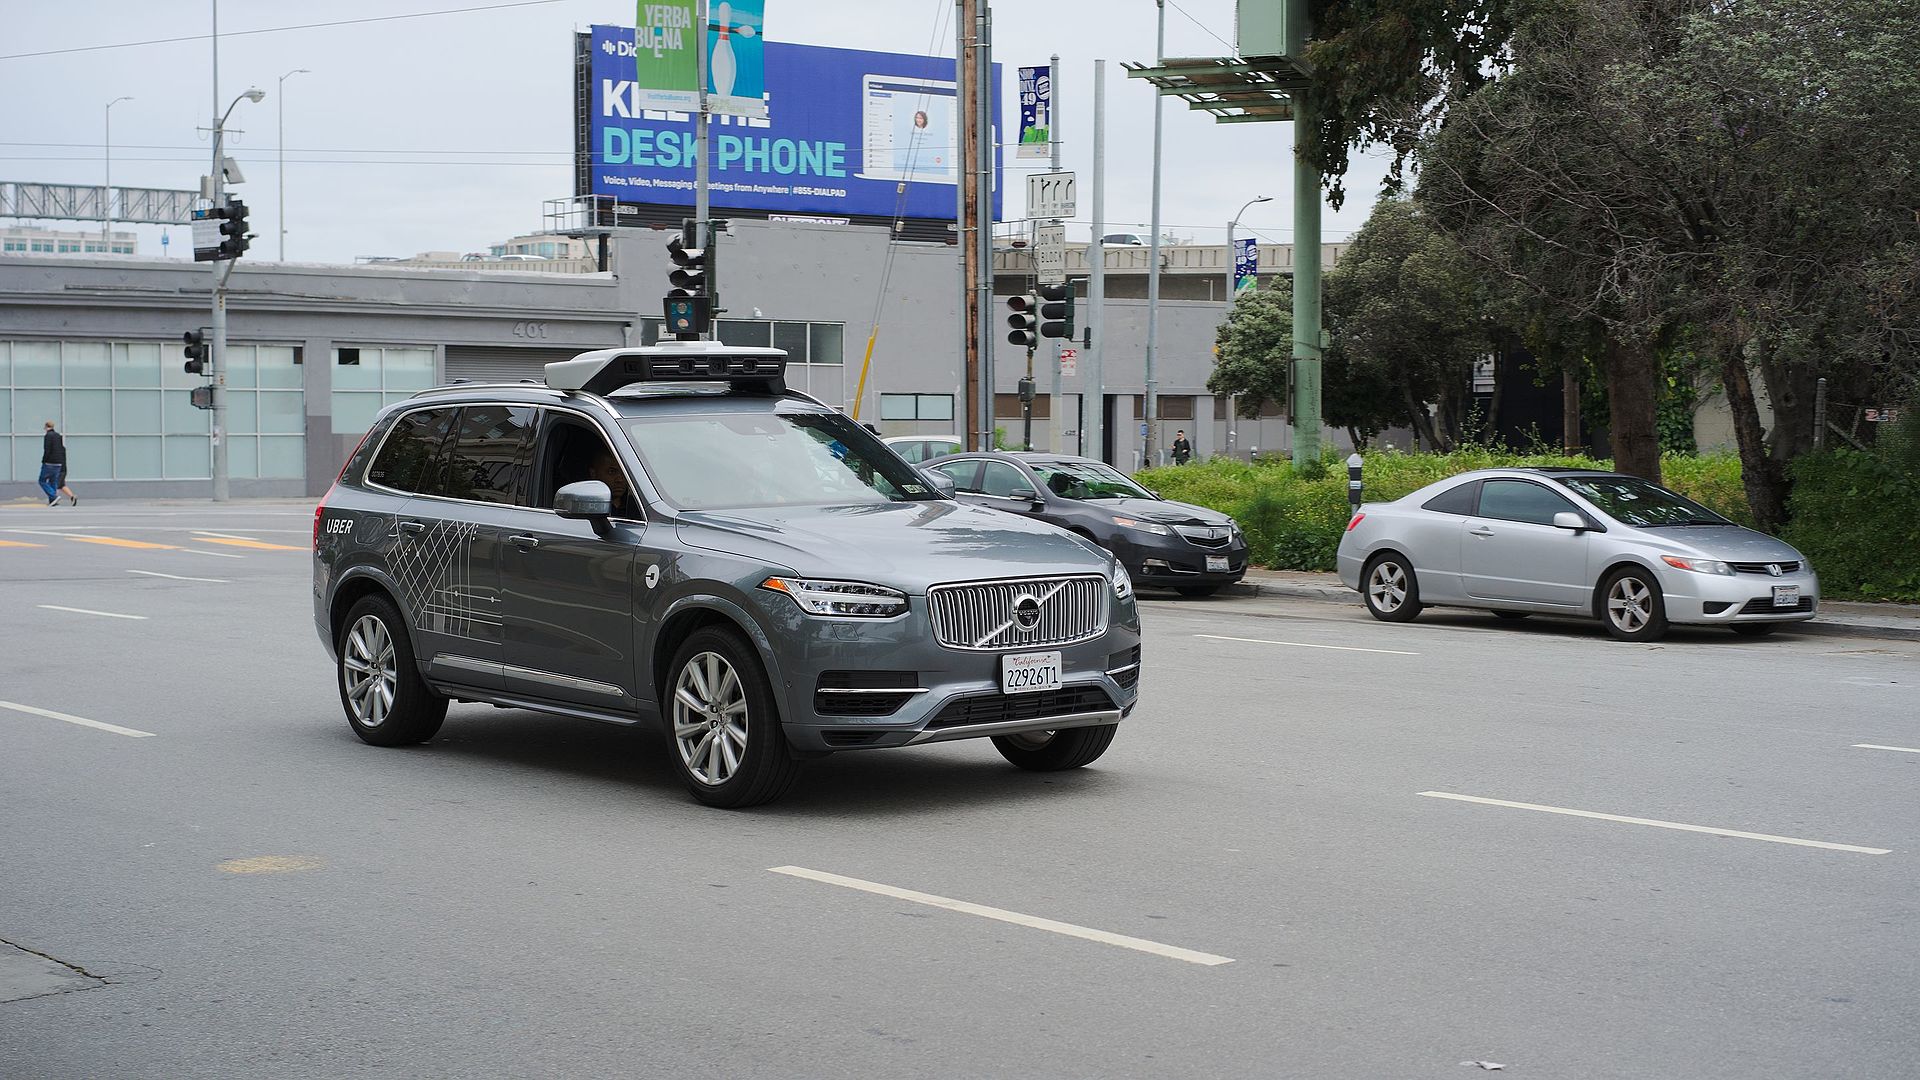 Uber_Self_Driving_Volvo_at_Harrison_at_4th By Dllu - Own work, CC BY-SA 4.0